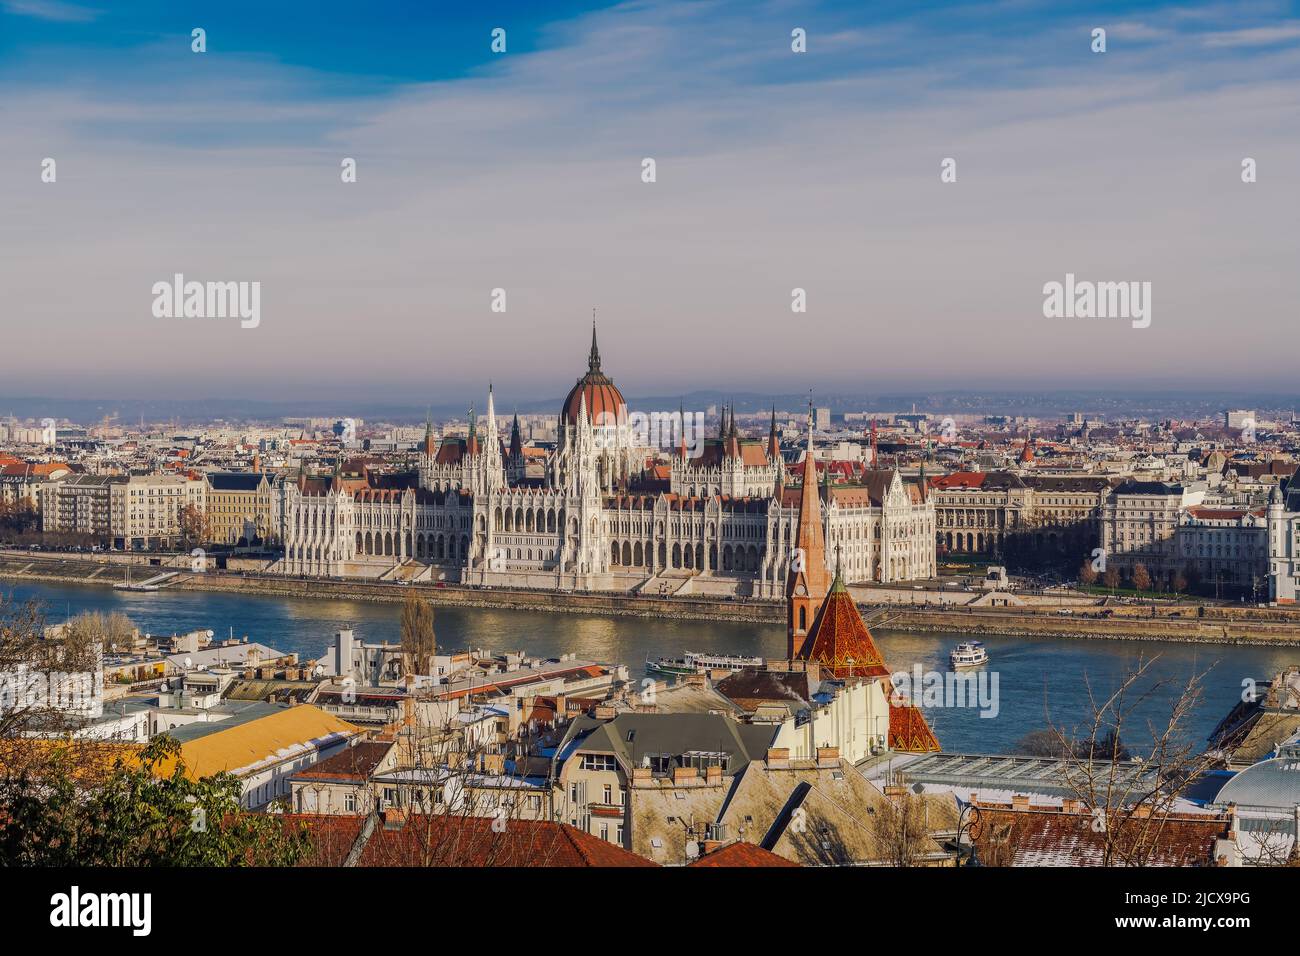 Panoramic day view of neo-Gothic style Orszaghaz Parliament complex landmark on the bank of River Danube, UNESCO World Heritage Site, Budapest Stock Photo